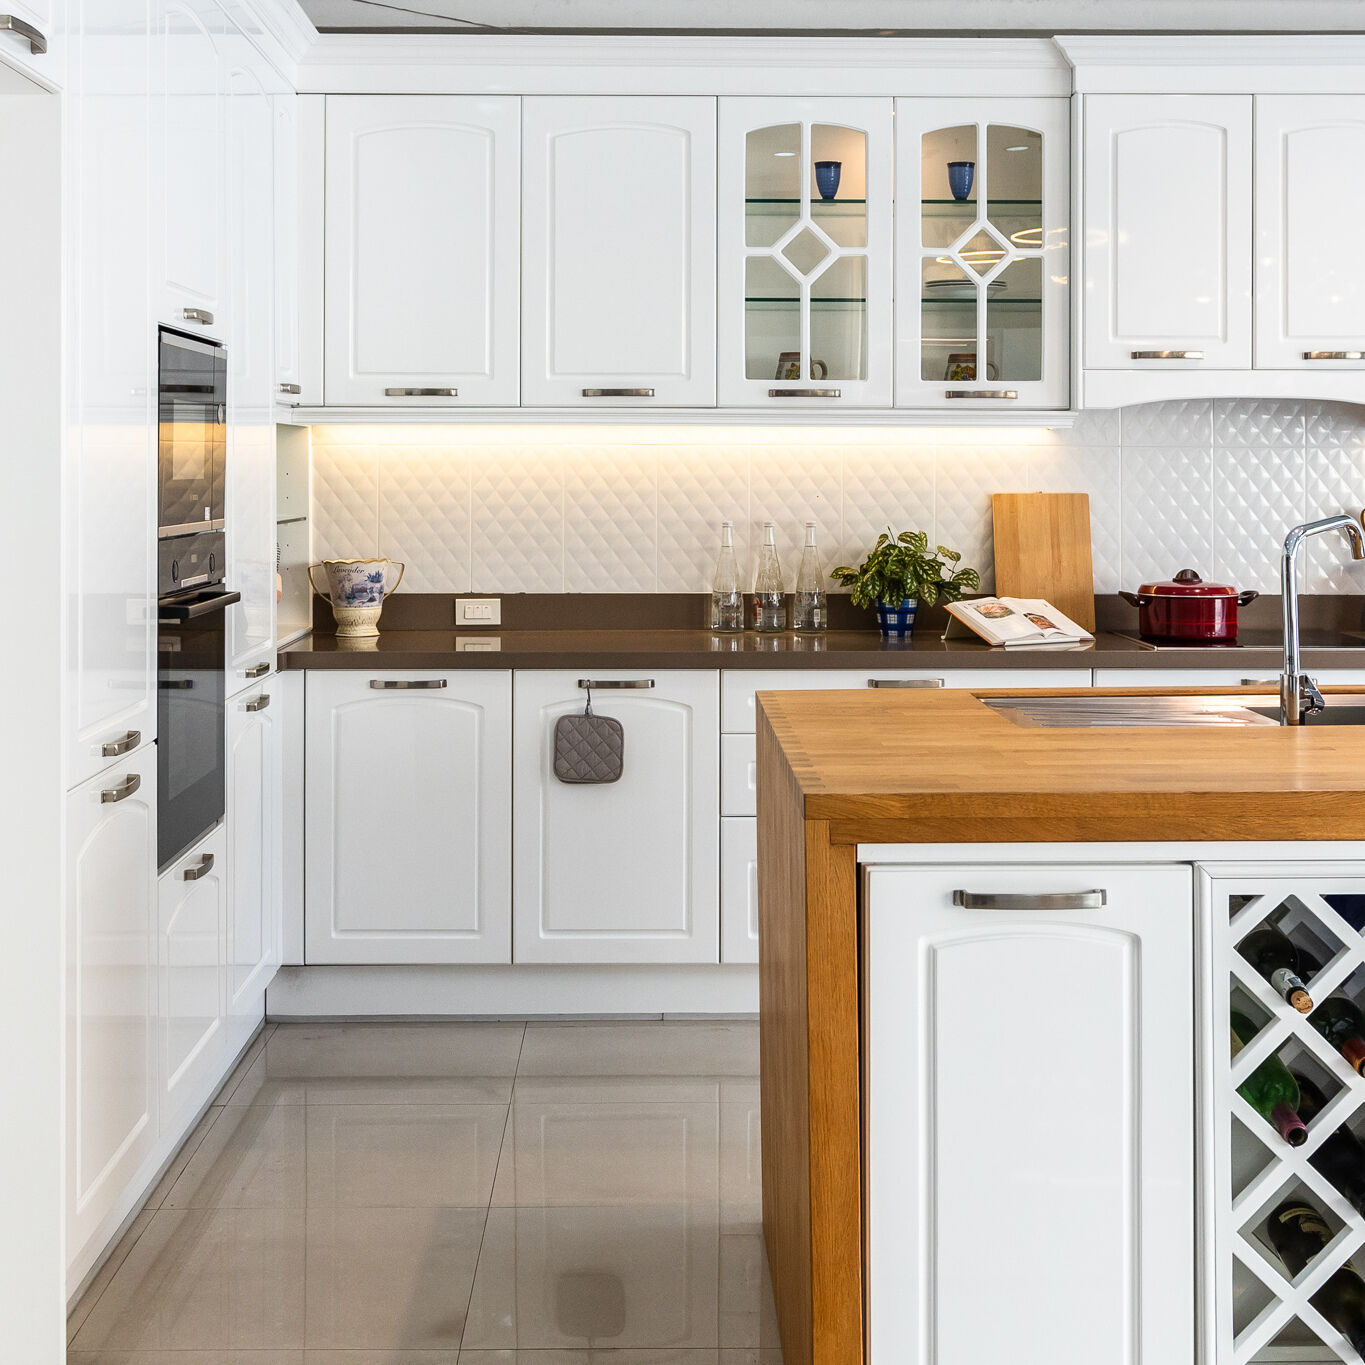 Middleton series kitchen. White spray-painted arched raised-panel doors. contemporary look.